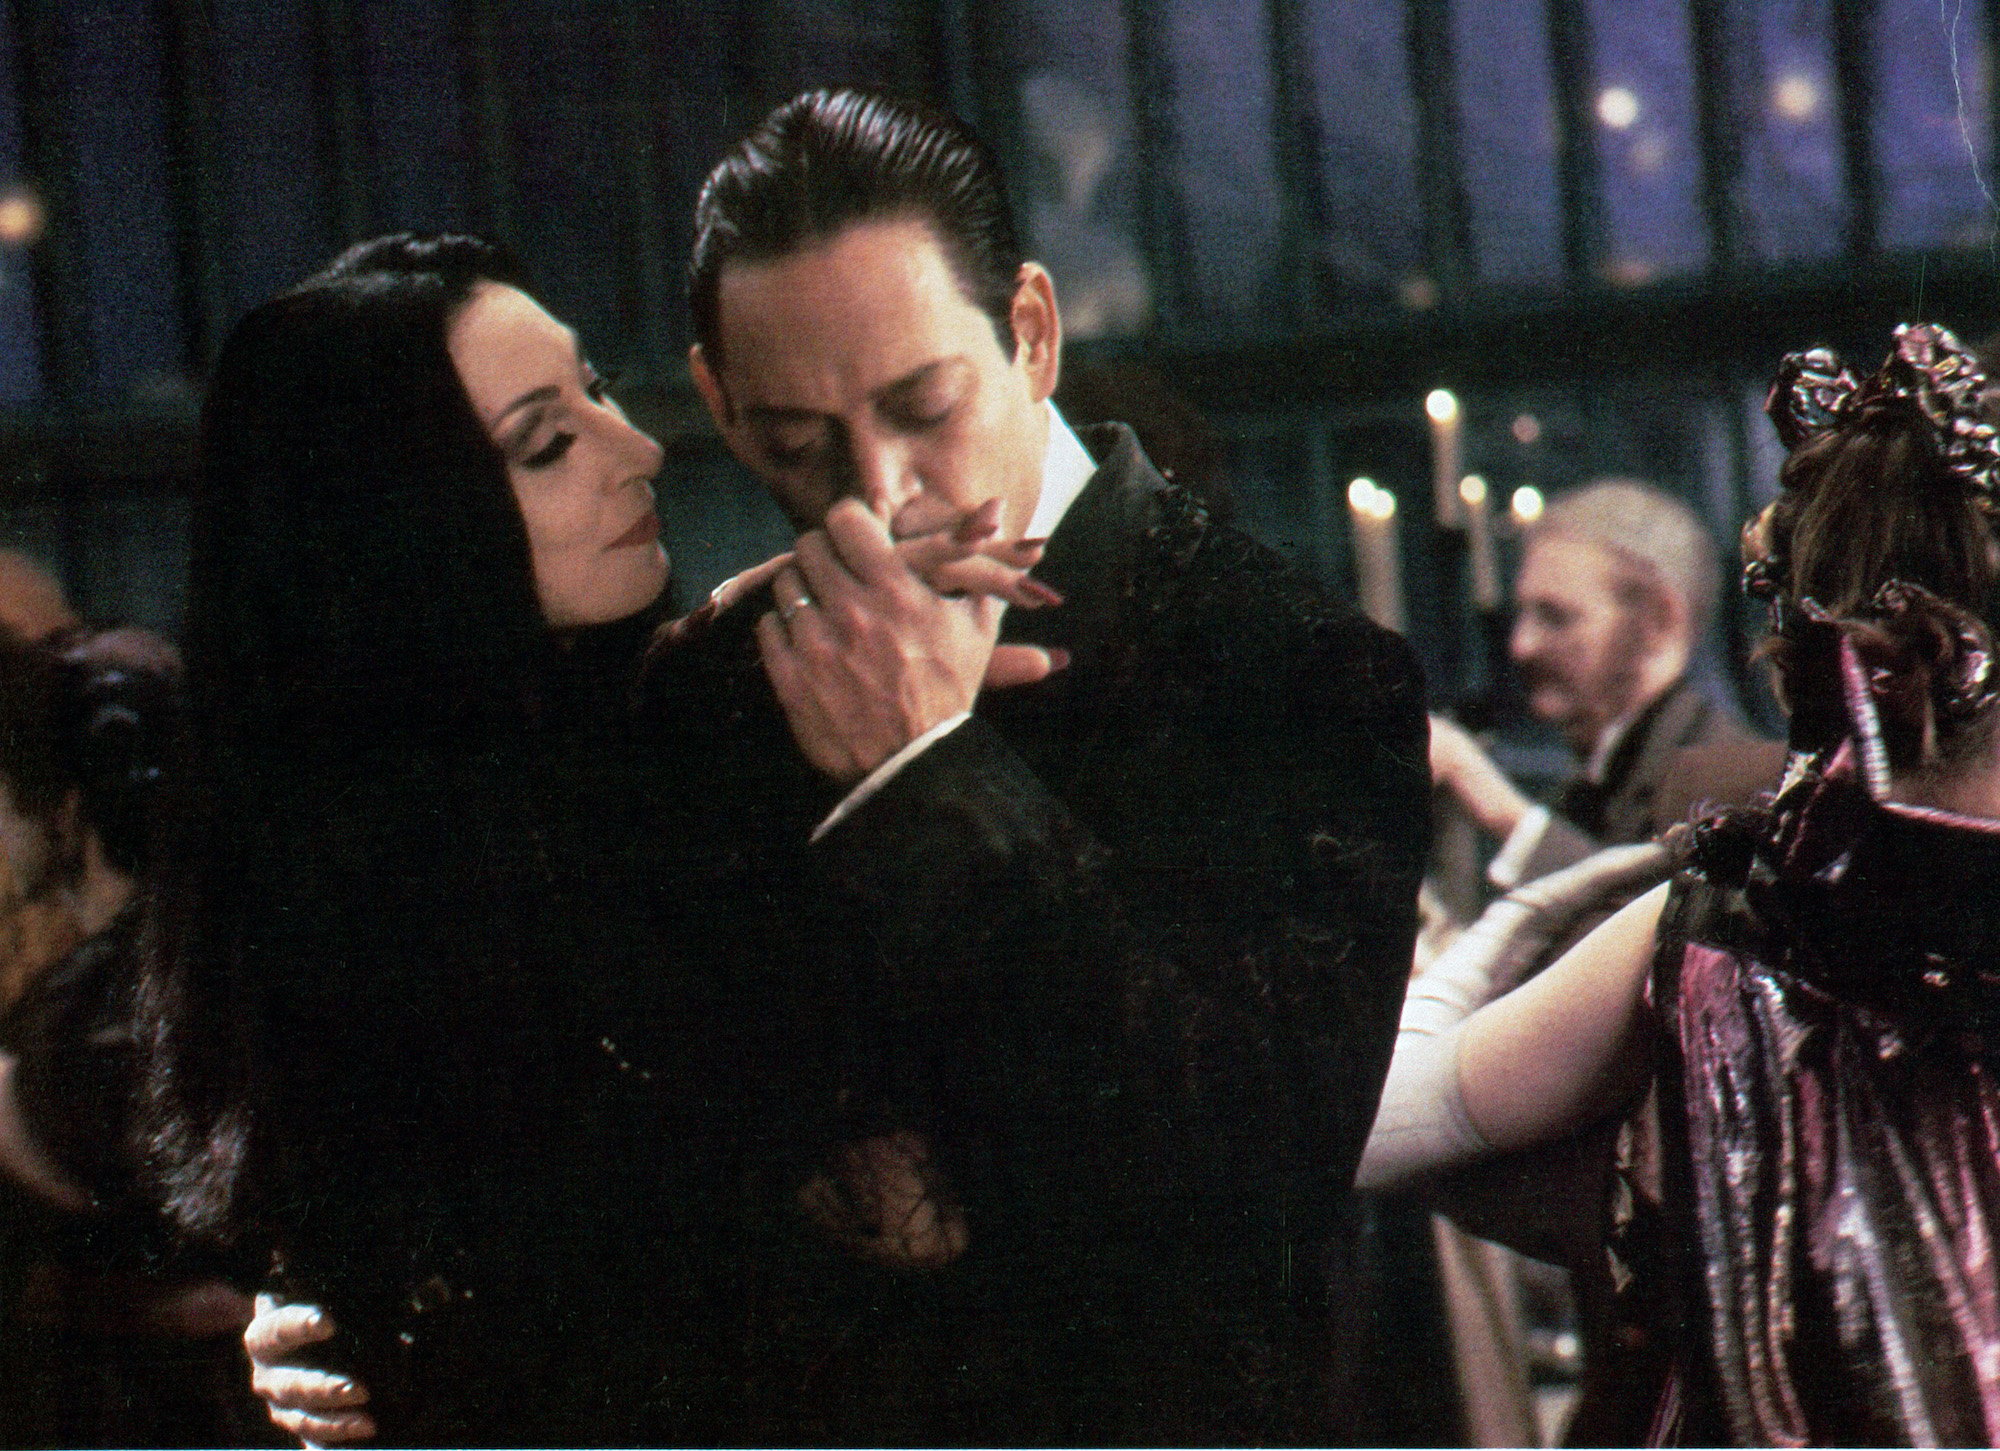 Anjelica Huston is kissed on the hand by Raul Julia in a scene from the film 'The Addams Family'